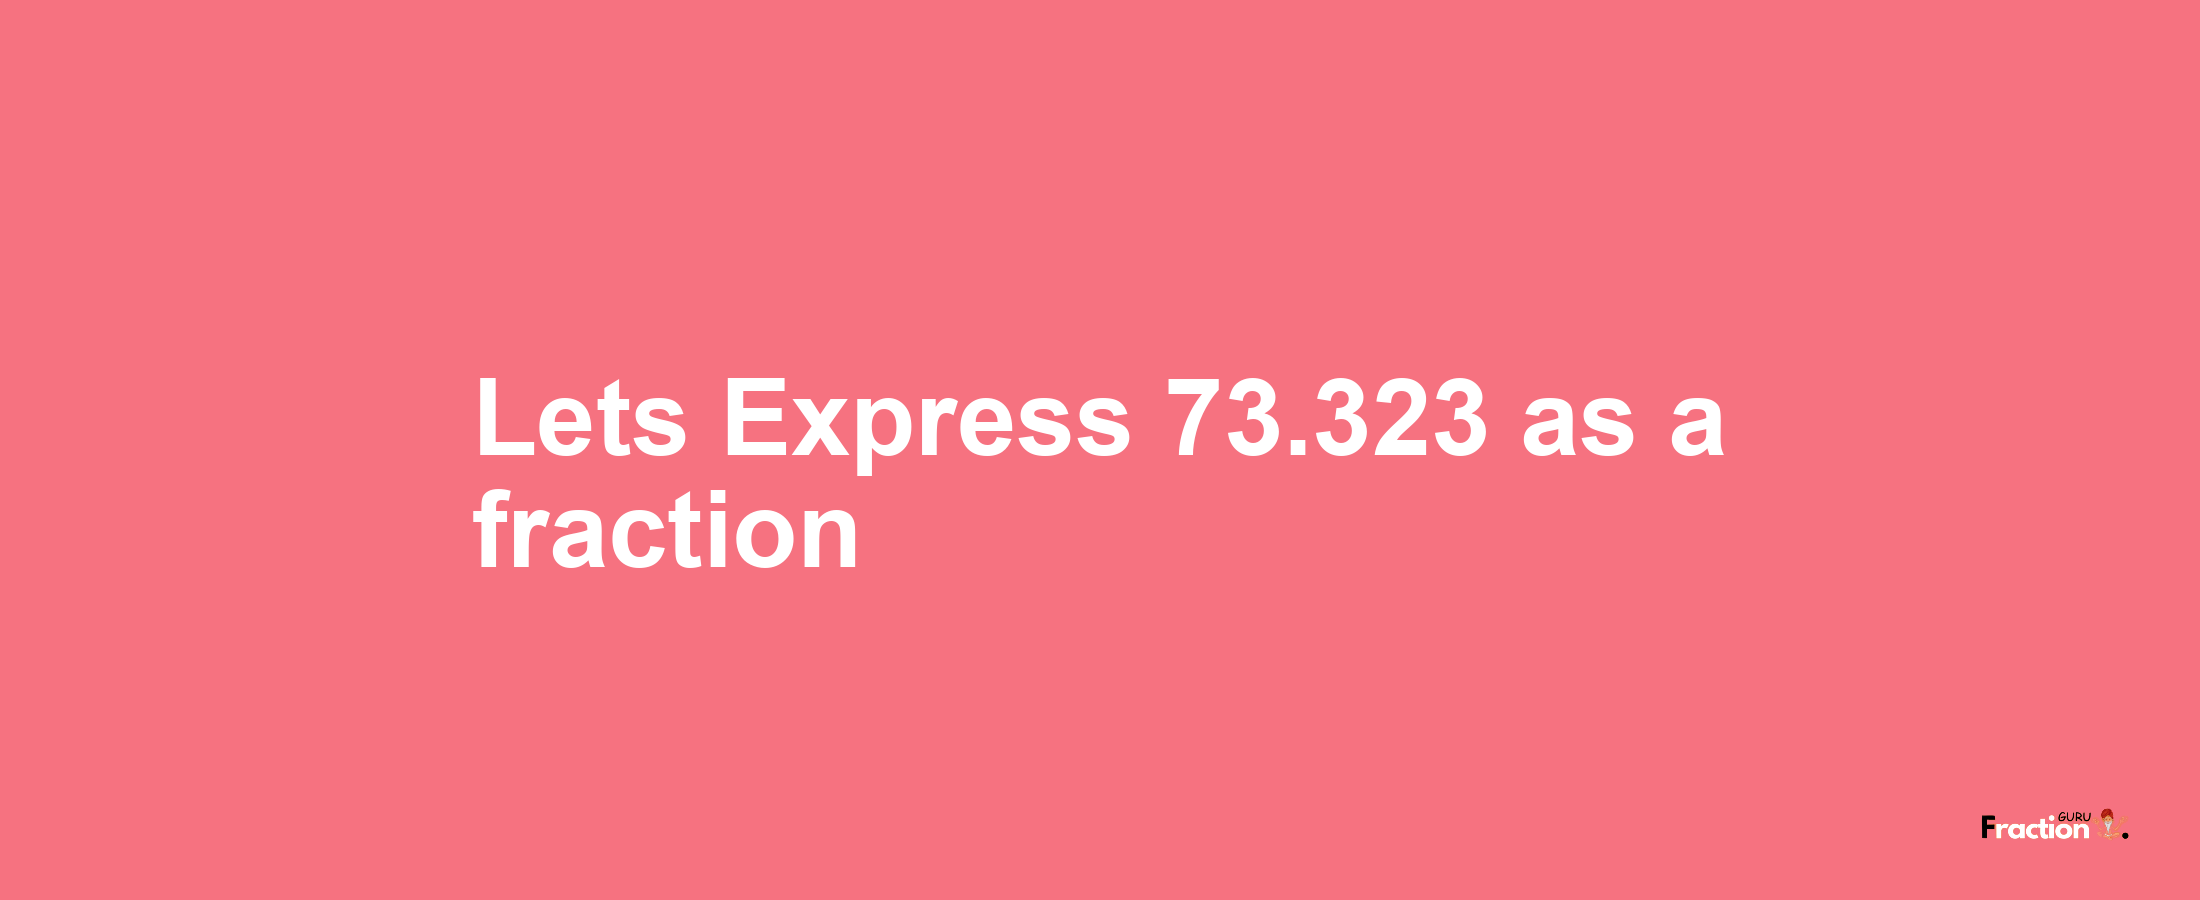 Lets Express 73.323 as afraction